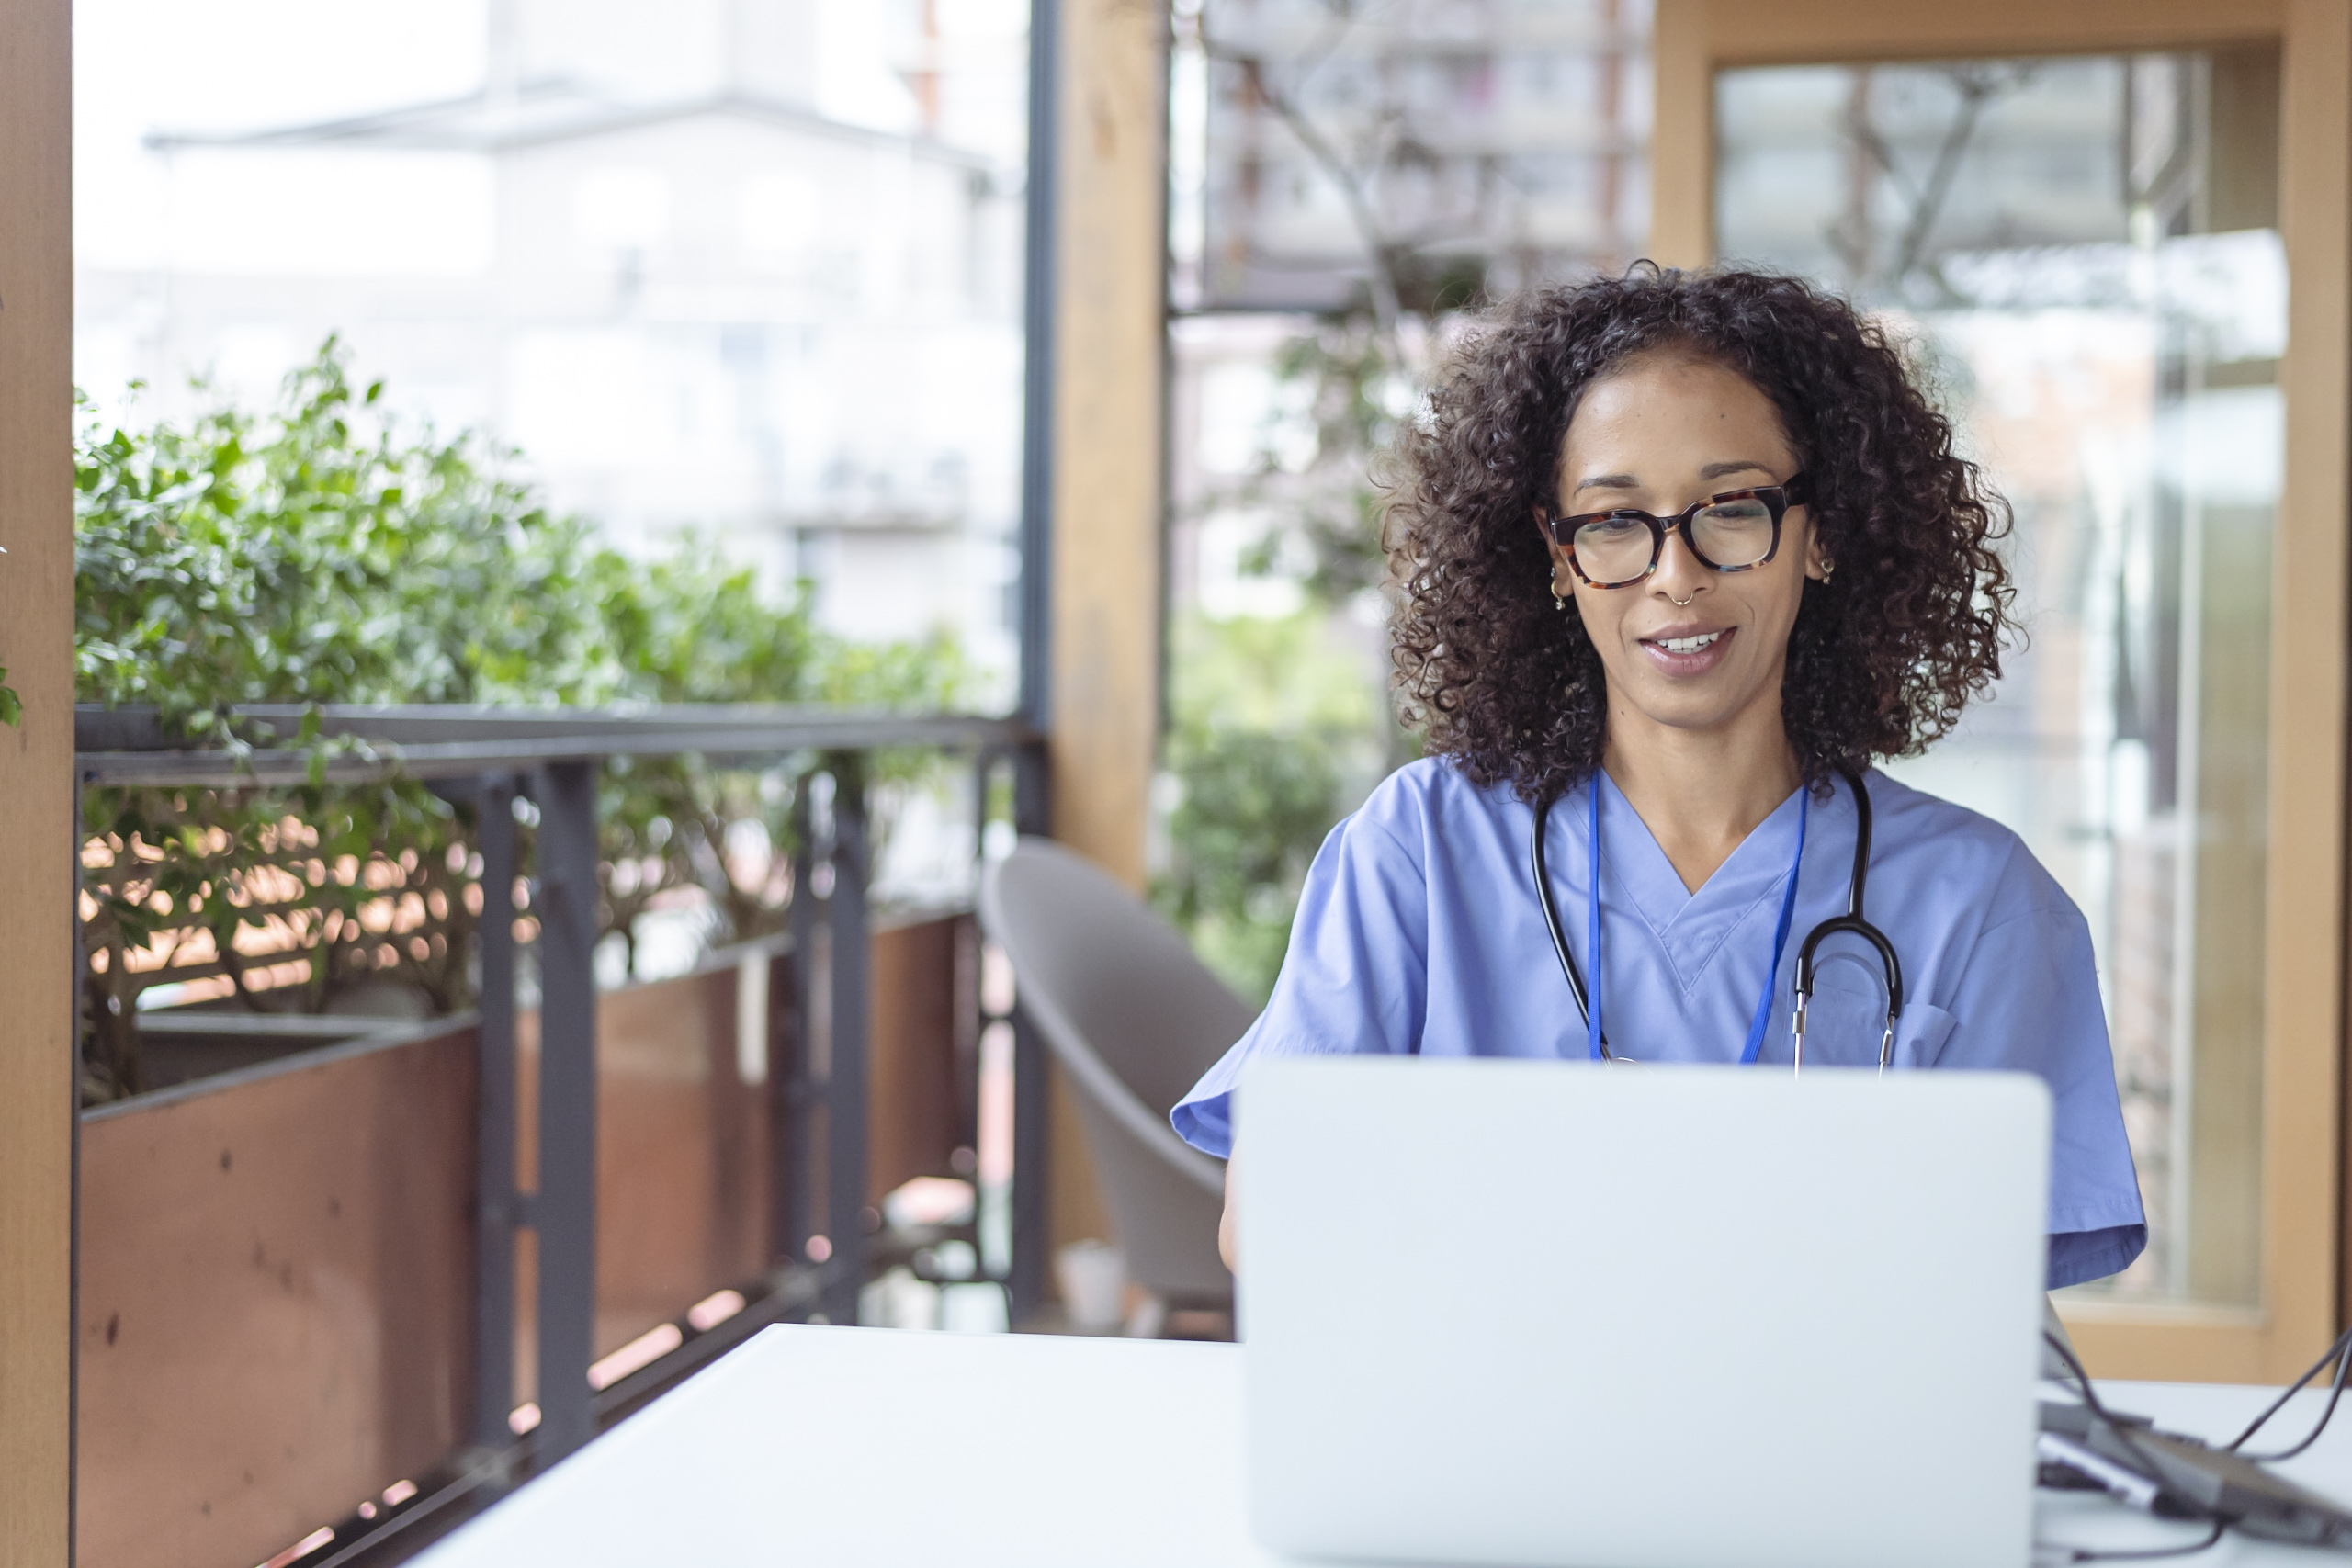 Black person with shoulder length curly hair wearing scrubs using a laptop